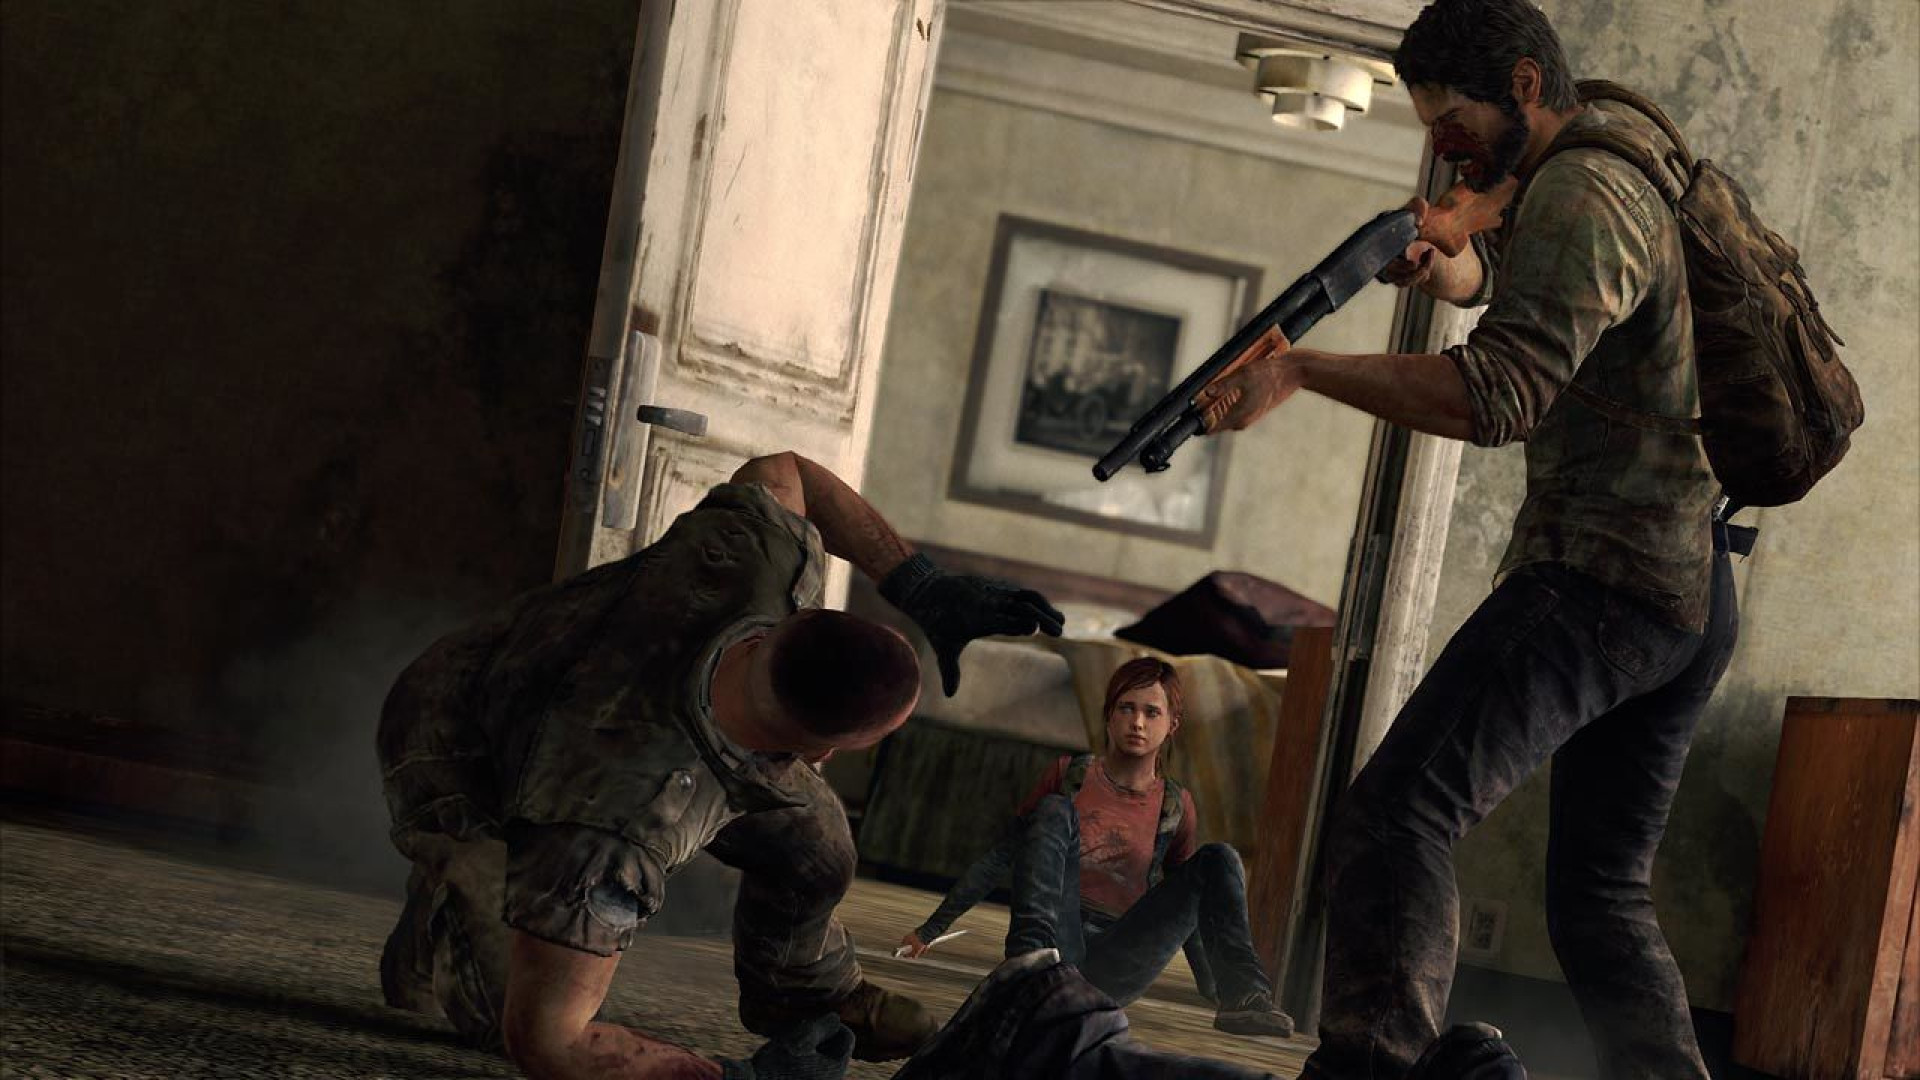 Last best games. The last of us. The last of us игра. The last of us 1. The last of us 2013.